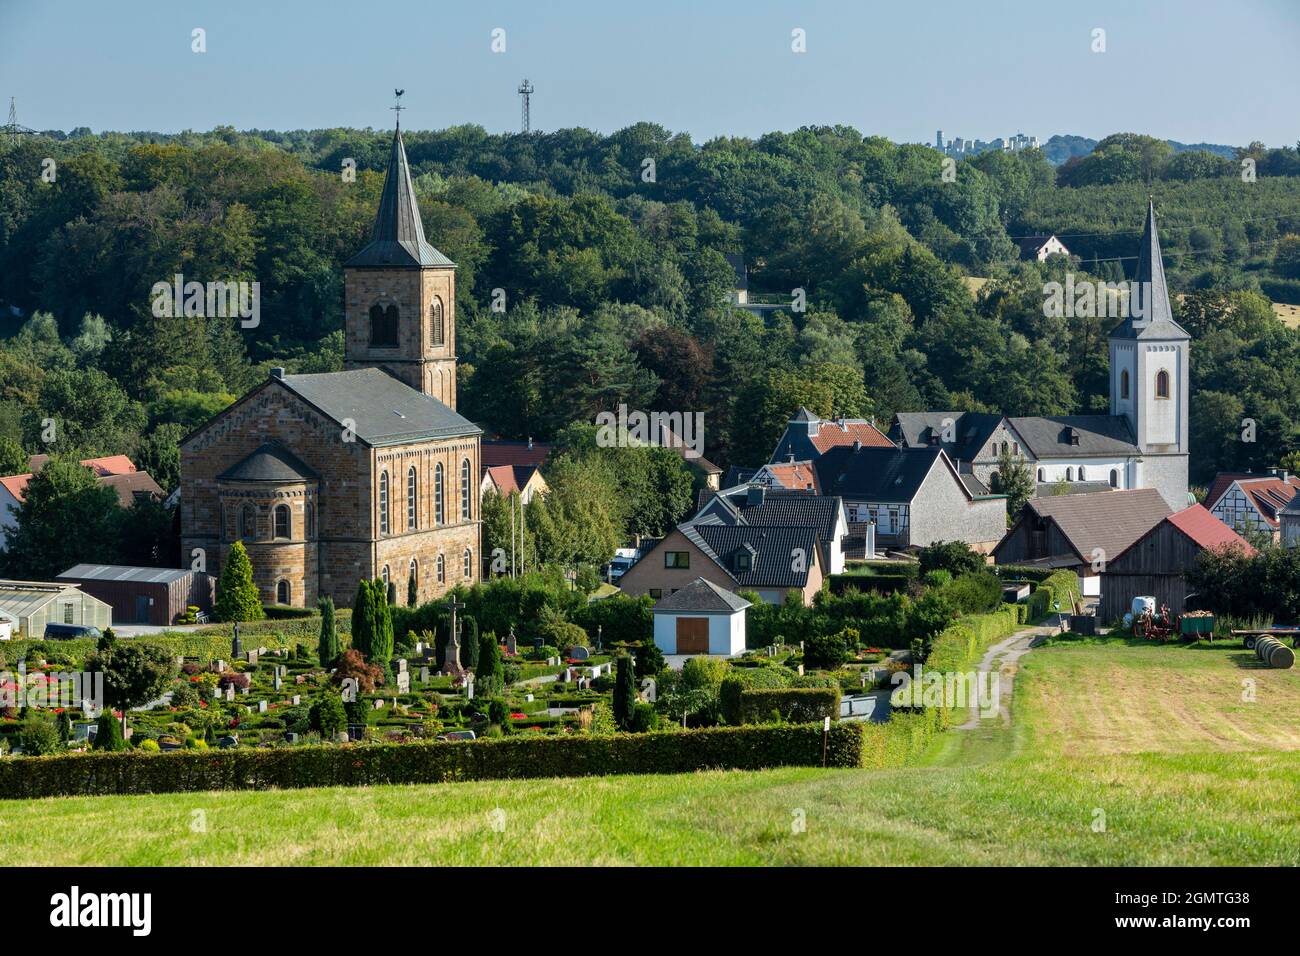 Germany, Wuelfrath, Wuelfrath-Duessel, Bergisches Land, Niederbergisches Land, Niederberg, Rhineland, North Rhine-Westphalia, NRW, panoramic view to Duessel village and the hilly landscape, ahead the cemetery, left the evangelic church, right the catholic church Saint Maximin, Romanesque, pillar basilica Stock Photo